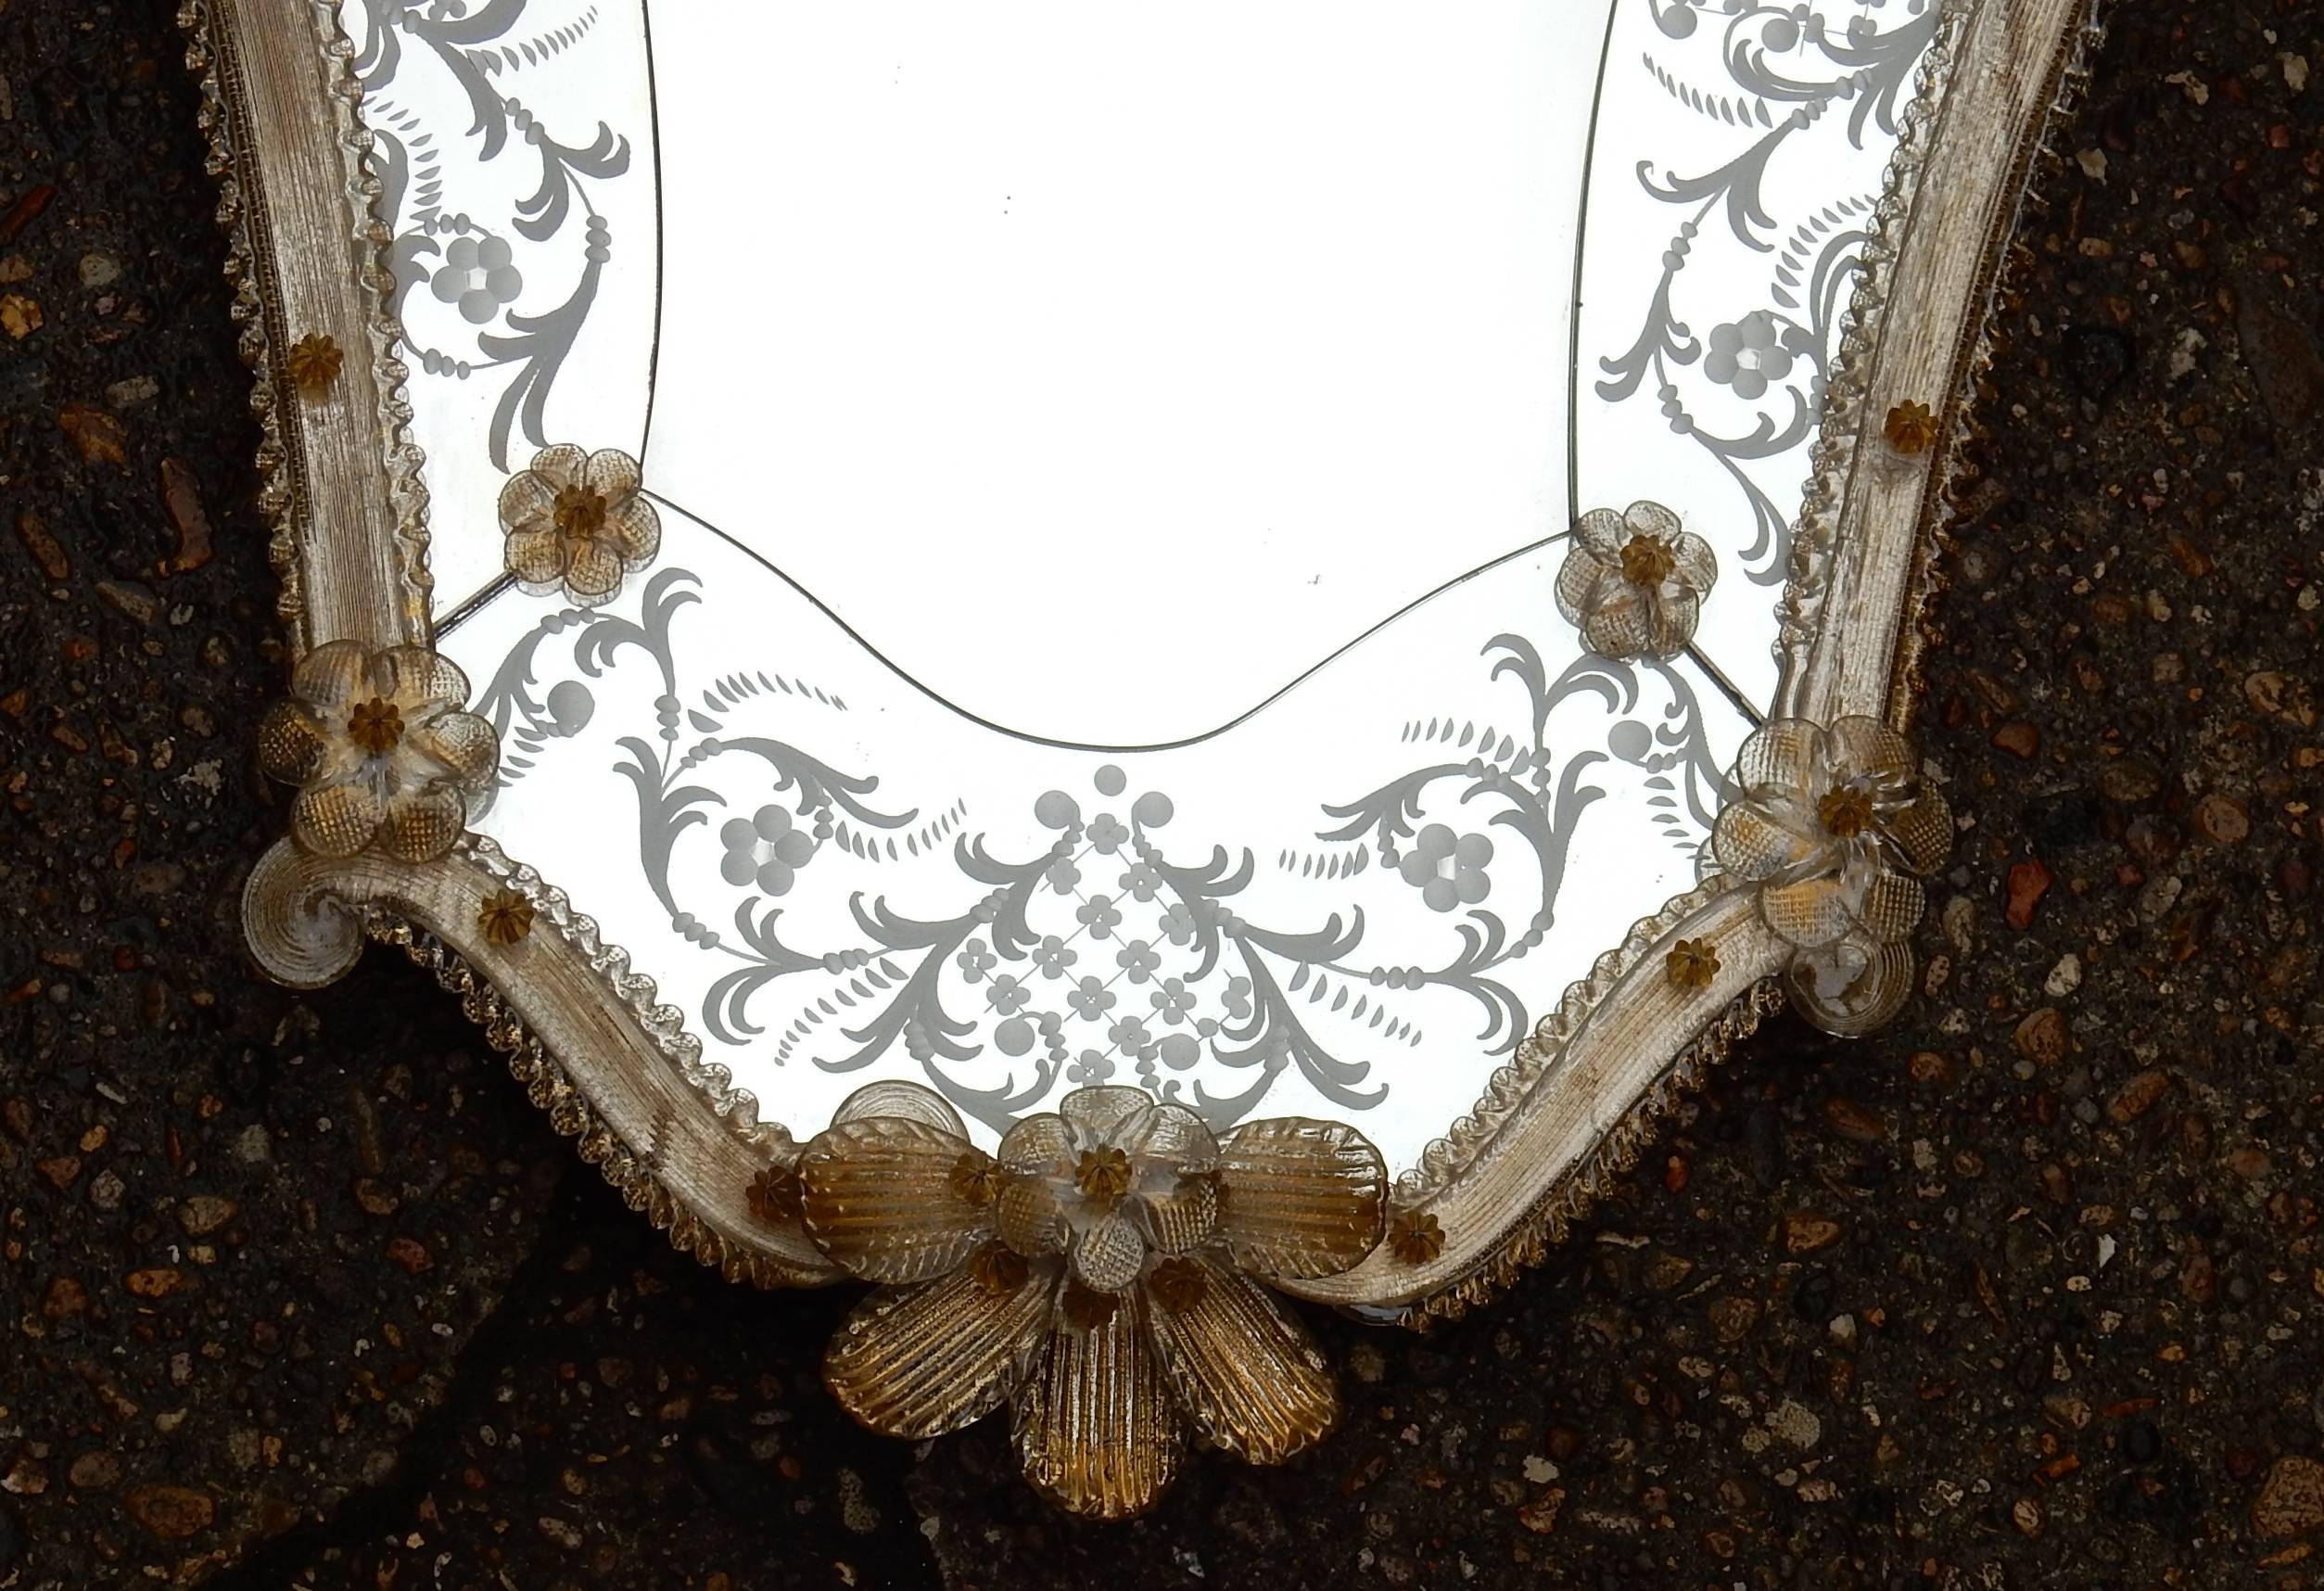 Murano mirror with leaves and golden flowers has the sheet of gold in inclusion, circa 1950-1970, good condition, central mirror is beveled. Measures: H 87 x 59 cm.